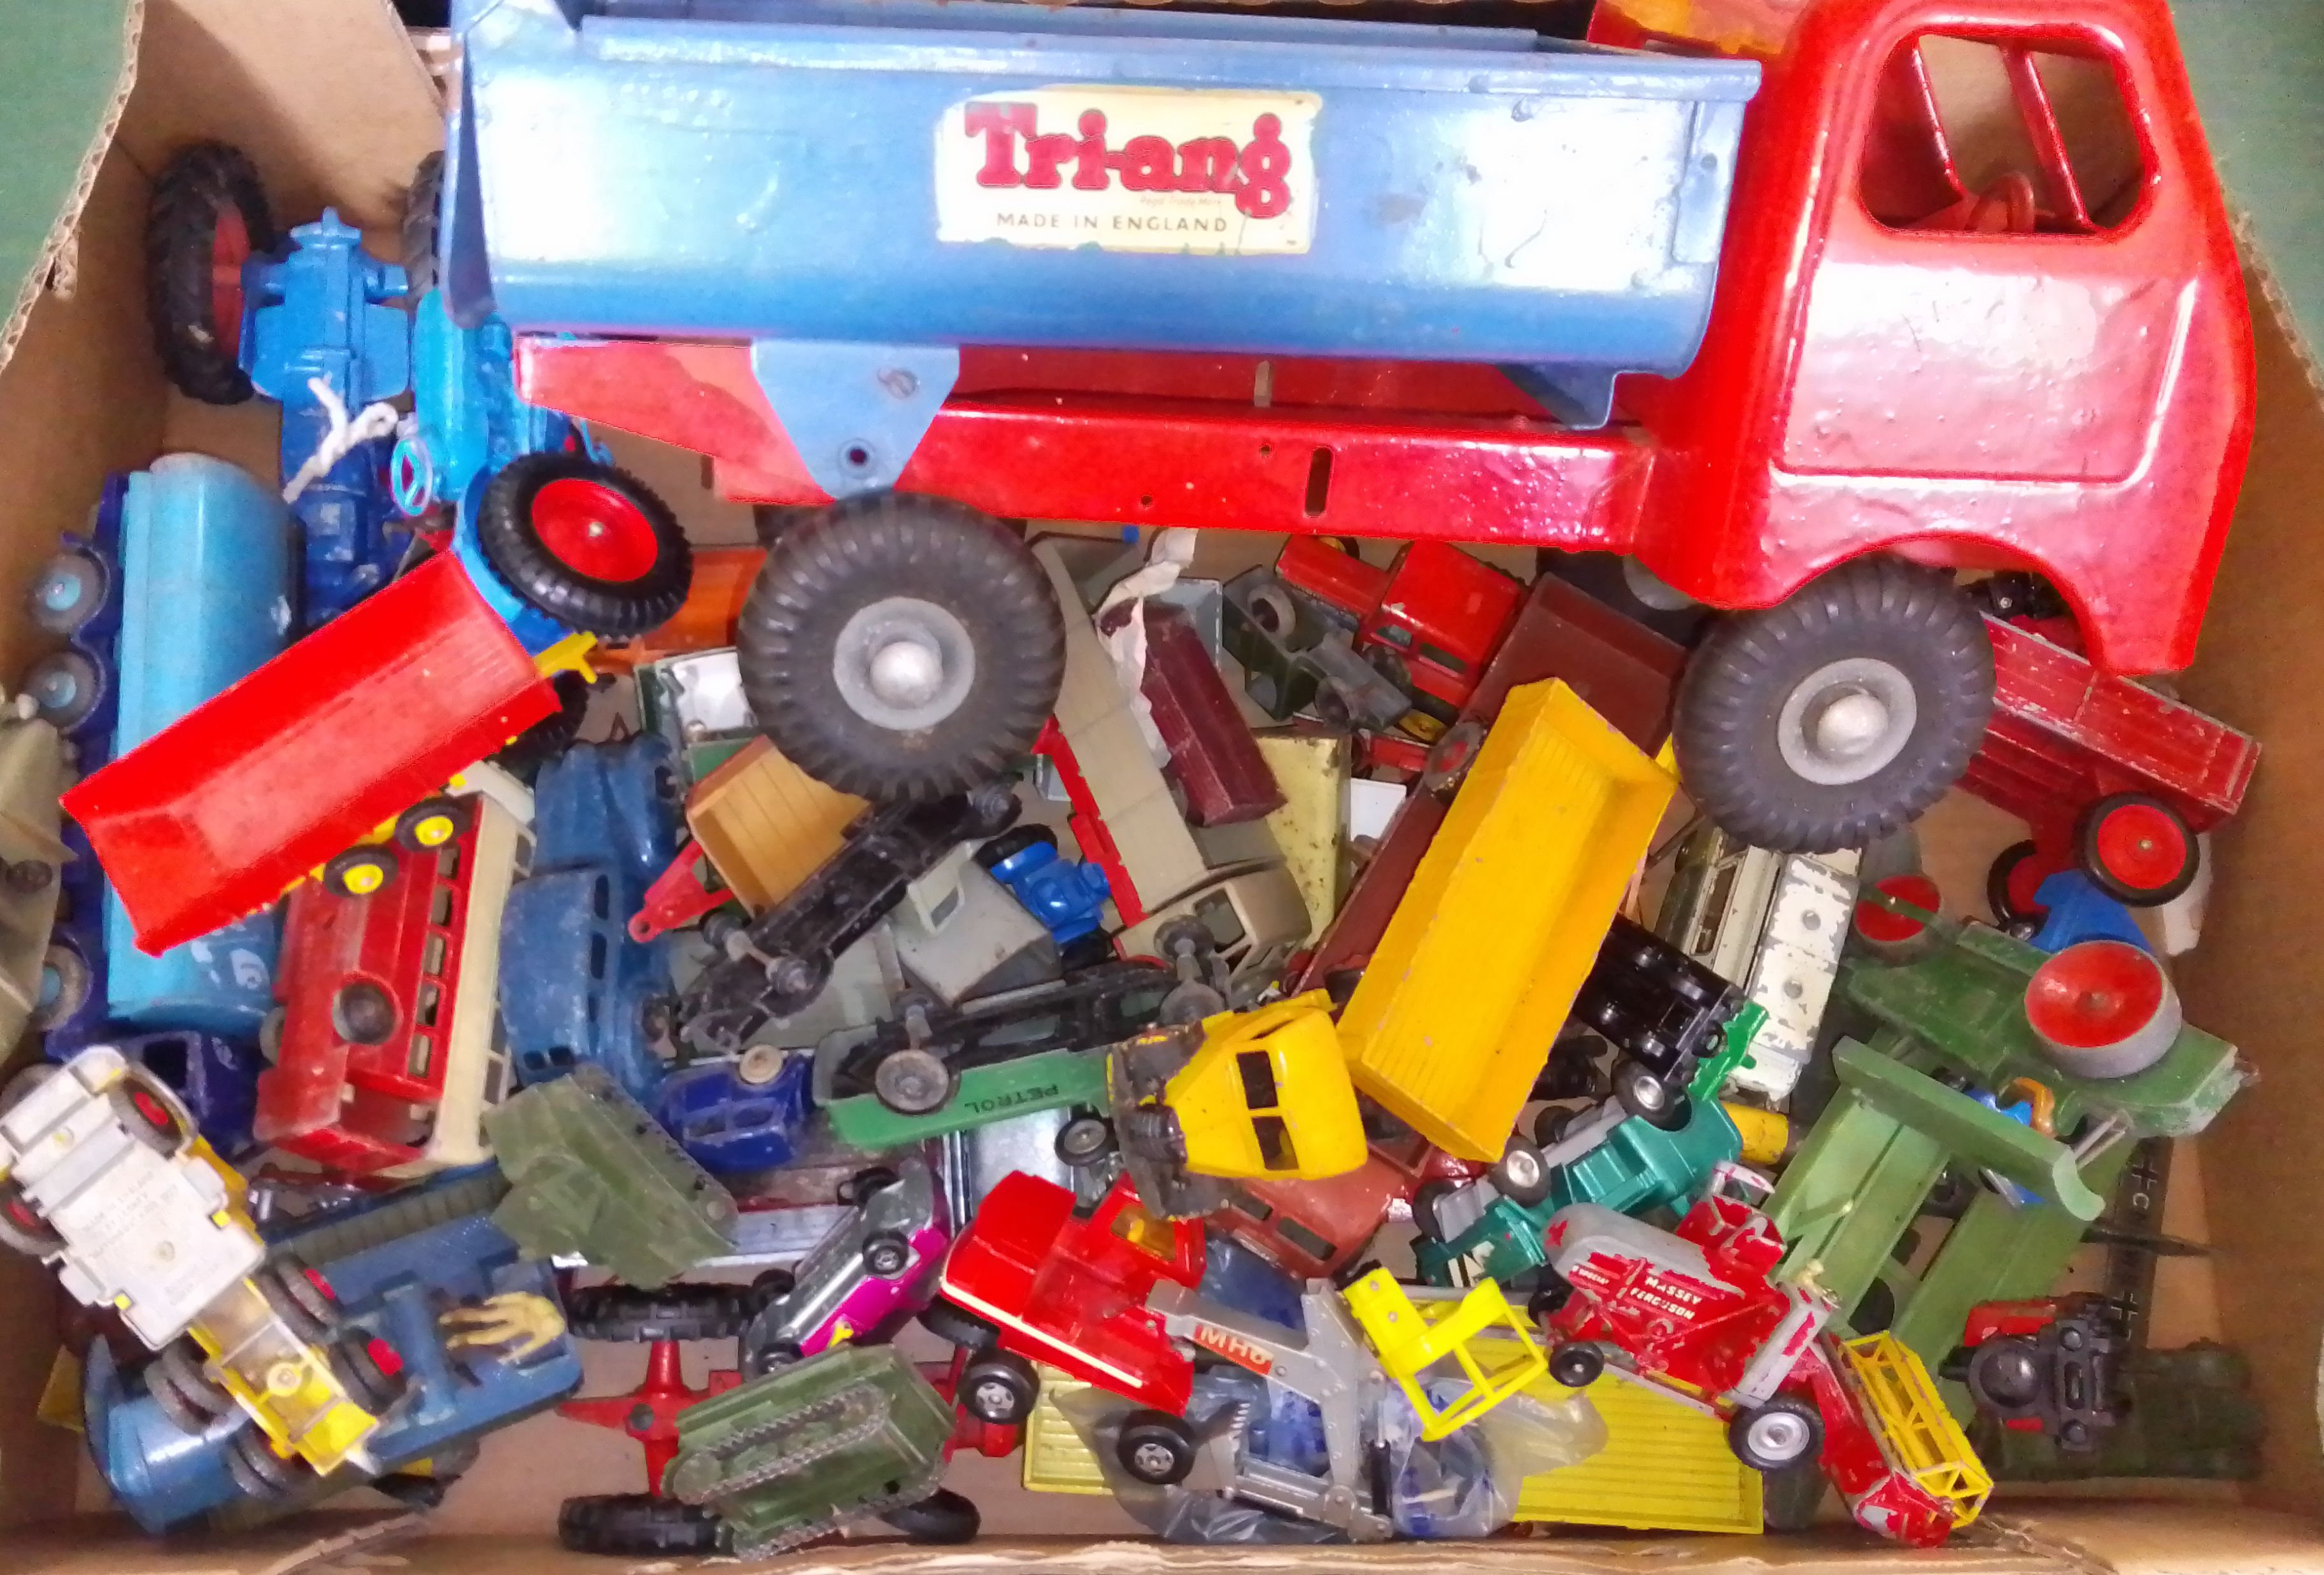 A box of assorted die-cast vehicles including Triang, Dinky, Lesney, Corgi.